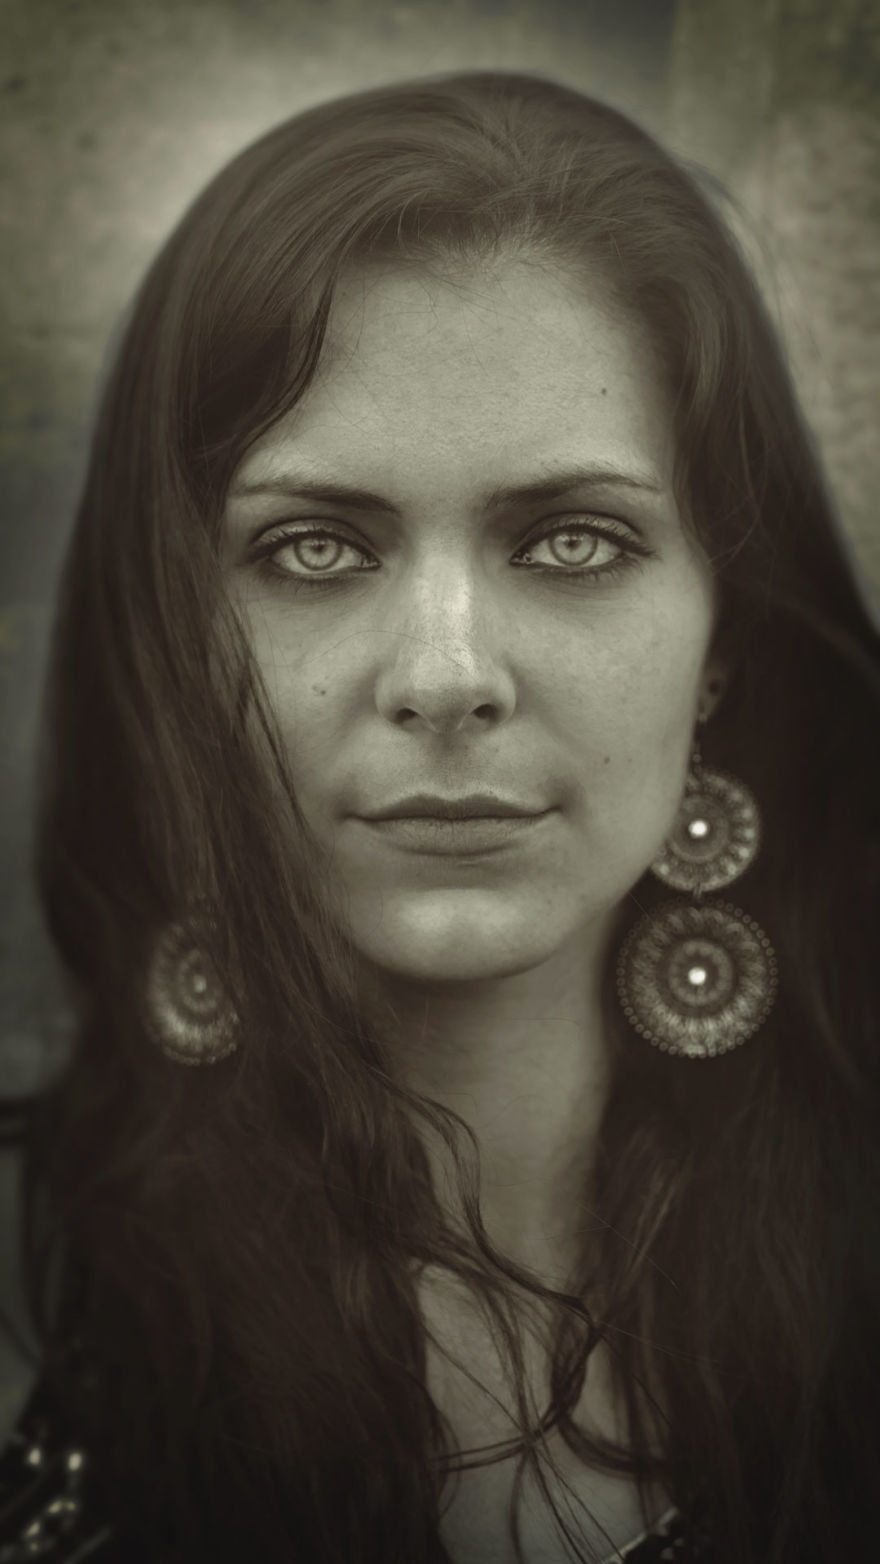 I Use Old Lenses And Photoshop To Create Portraits That Looks Like They Are From 1880